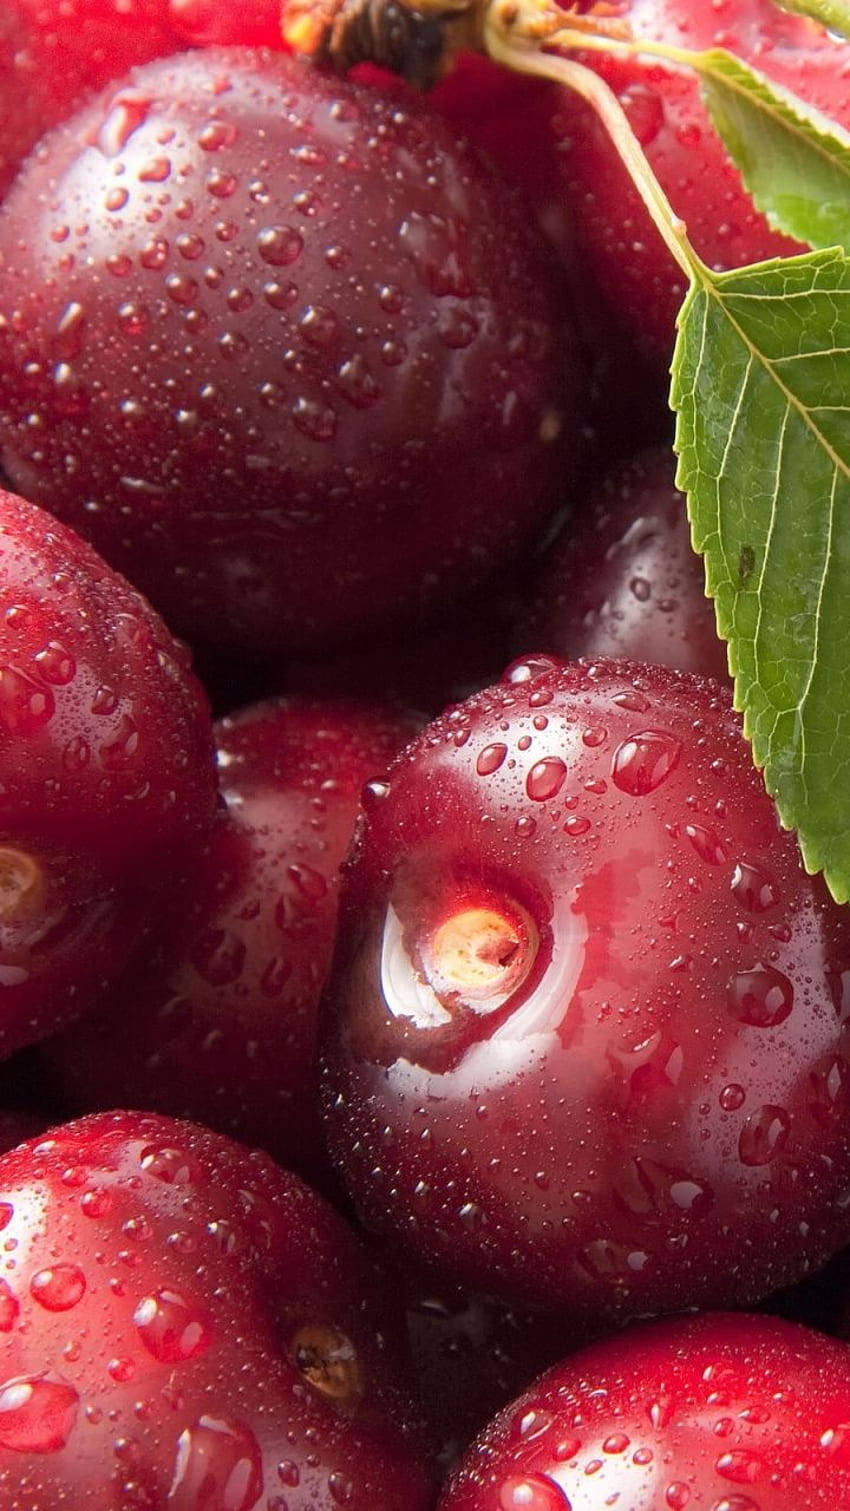 Cranberry With Water Droplets Wallpaper